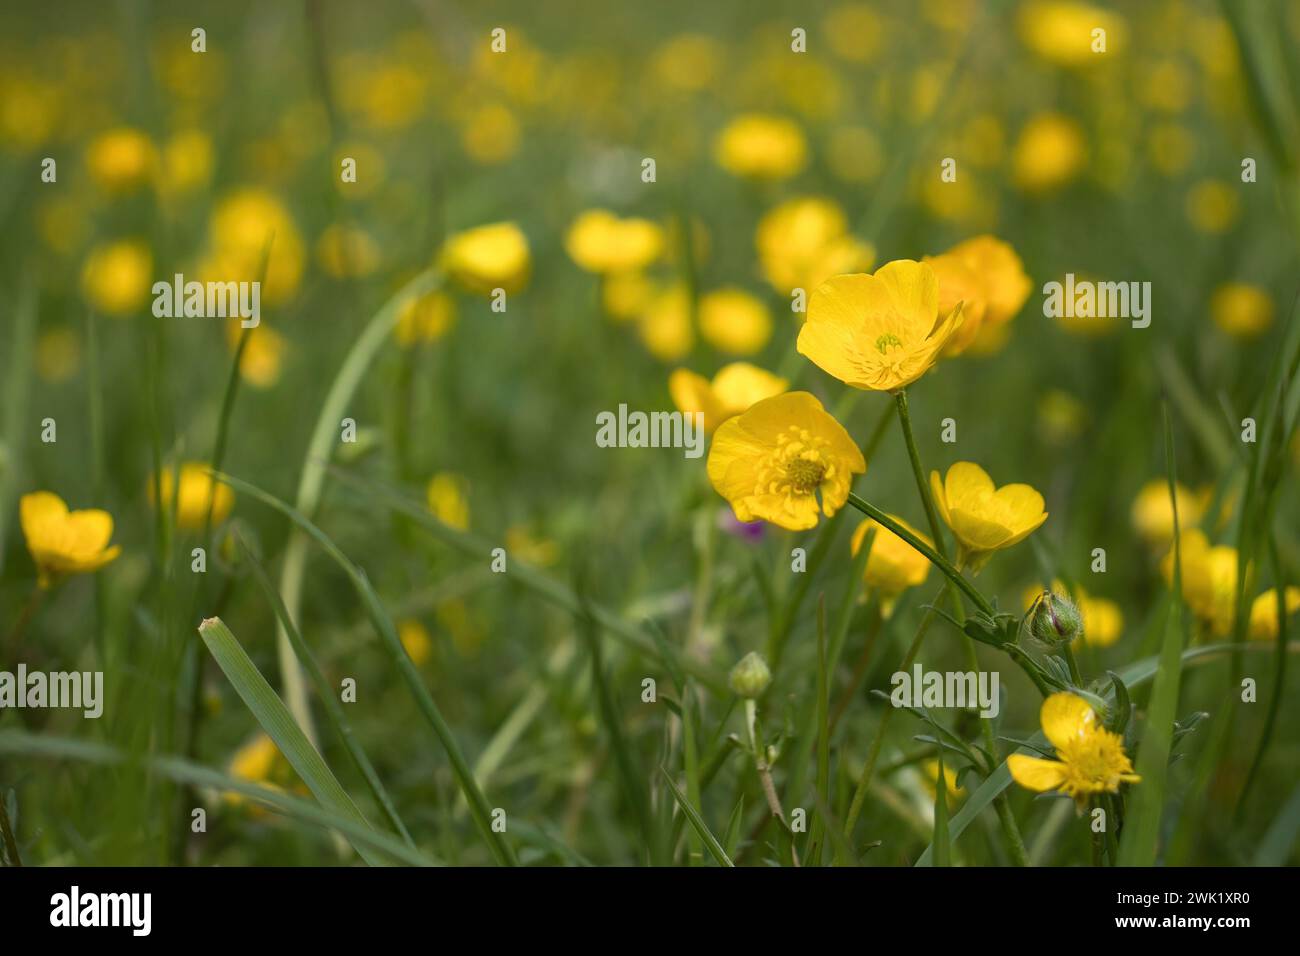 Small yellow flowers blooming in grass on a spring day in Rhineland Palatinate, Germany. Stock Photo